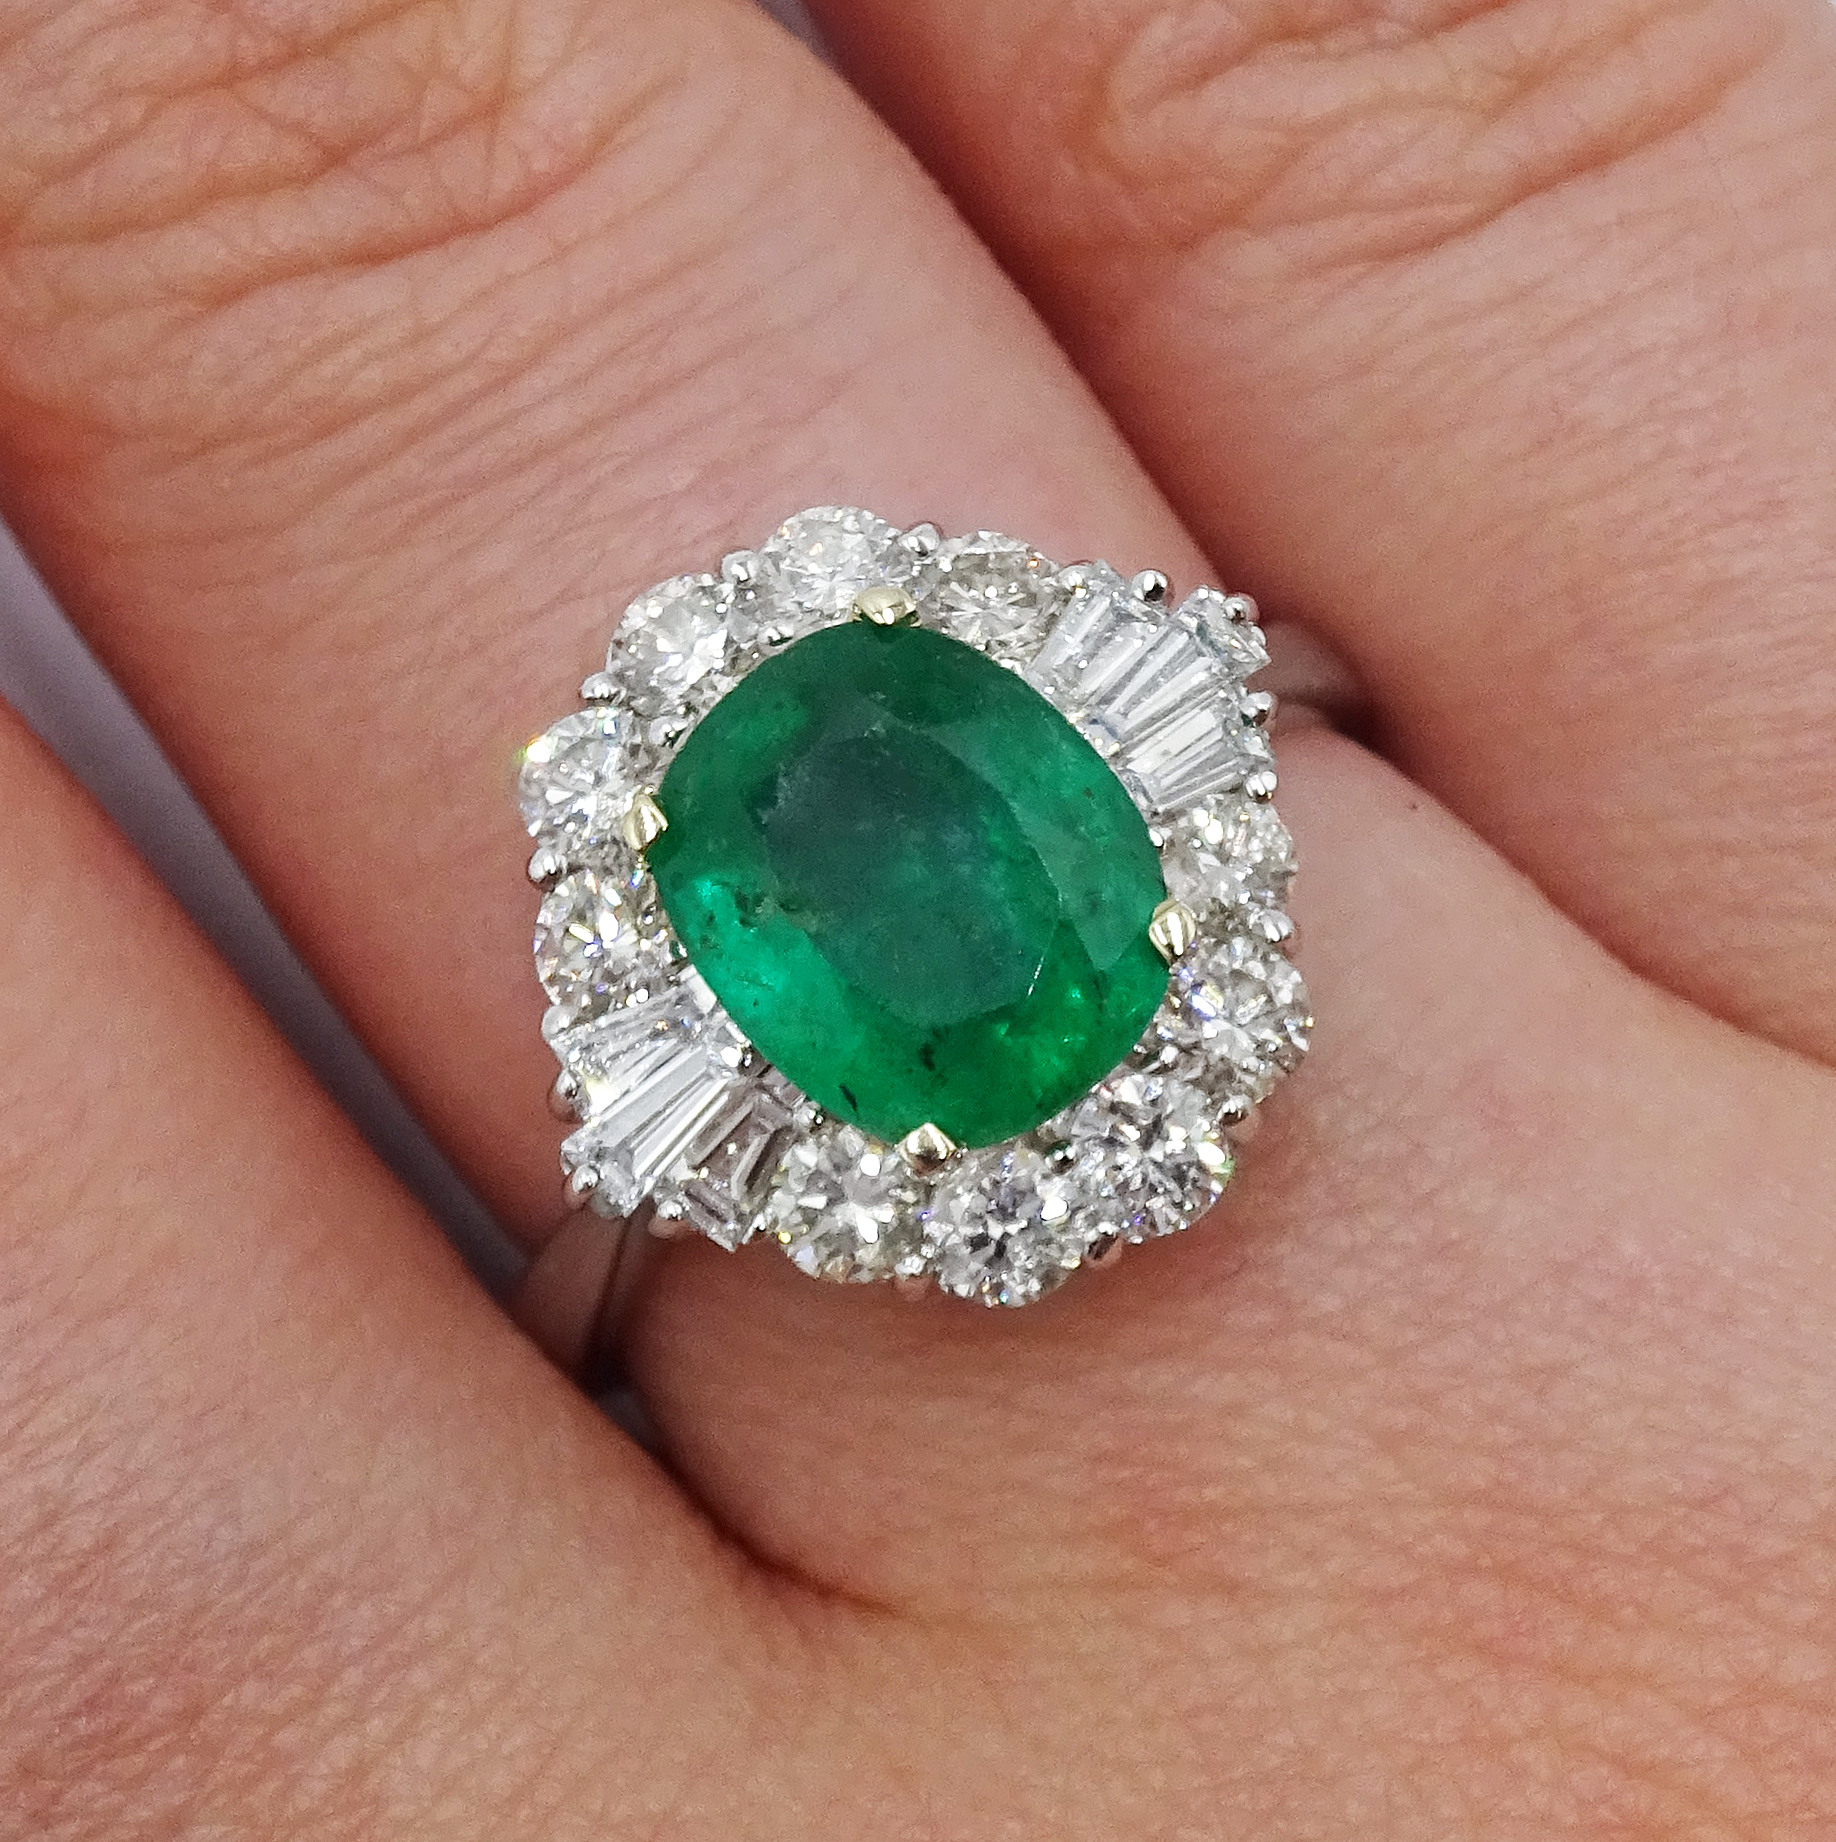 18ct white gold, emerald and diamond ring, set with a central oval shaped emerald, emerald total wei - Image 2 of 6